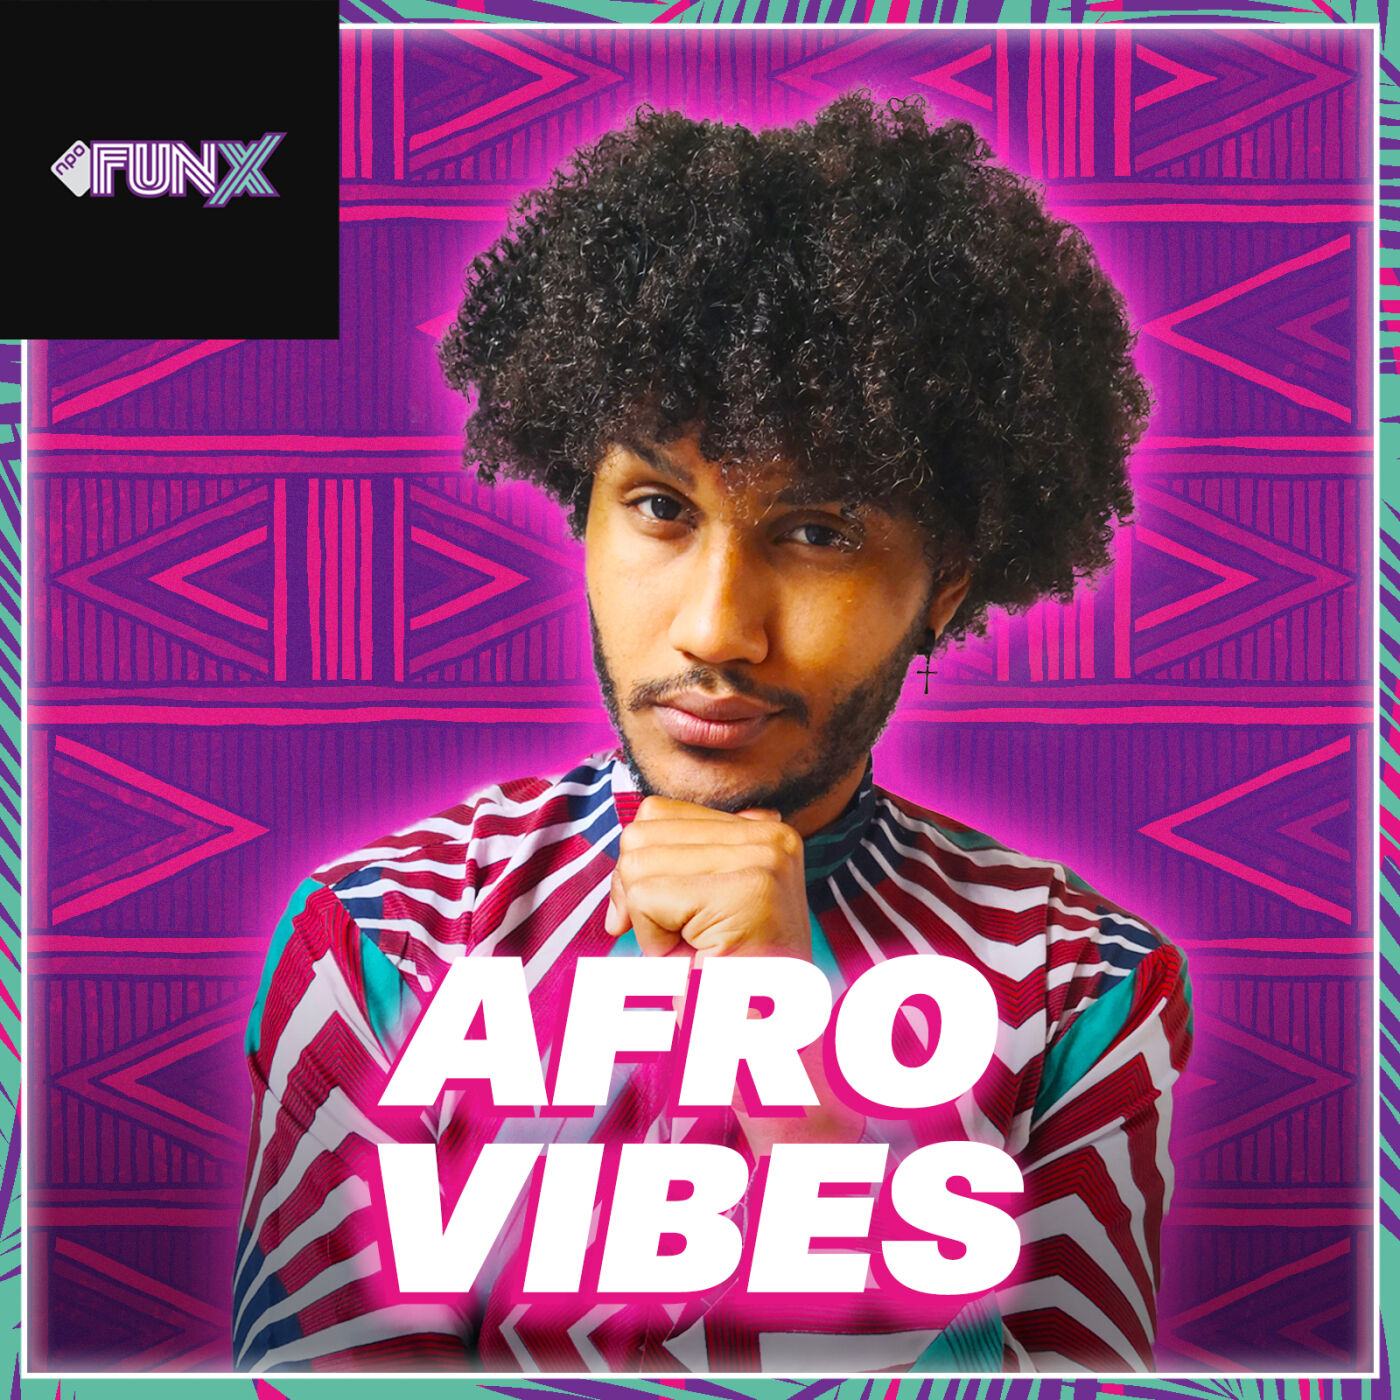 FunX Afro Vibes logo